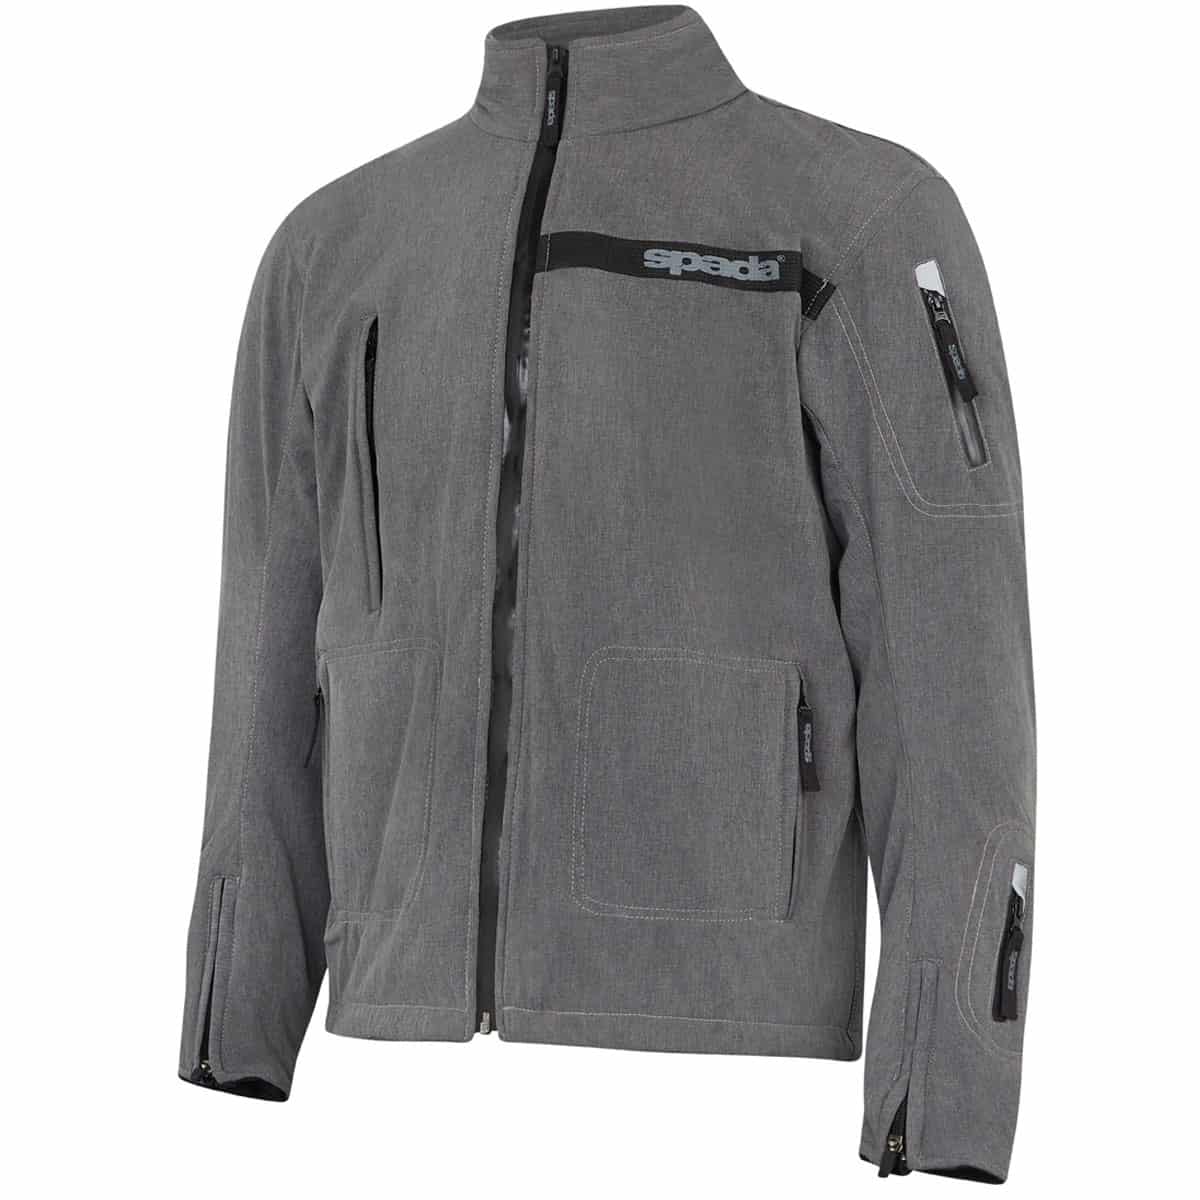 Spada Commute WP CE Jacket: A waterproof softshell jacket with CE protection